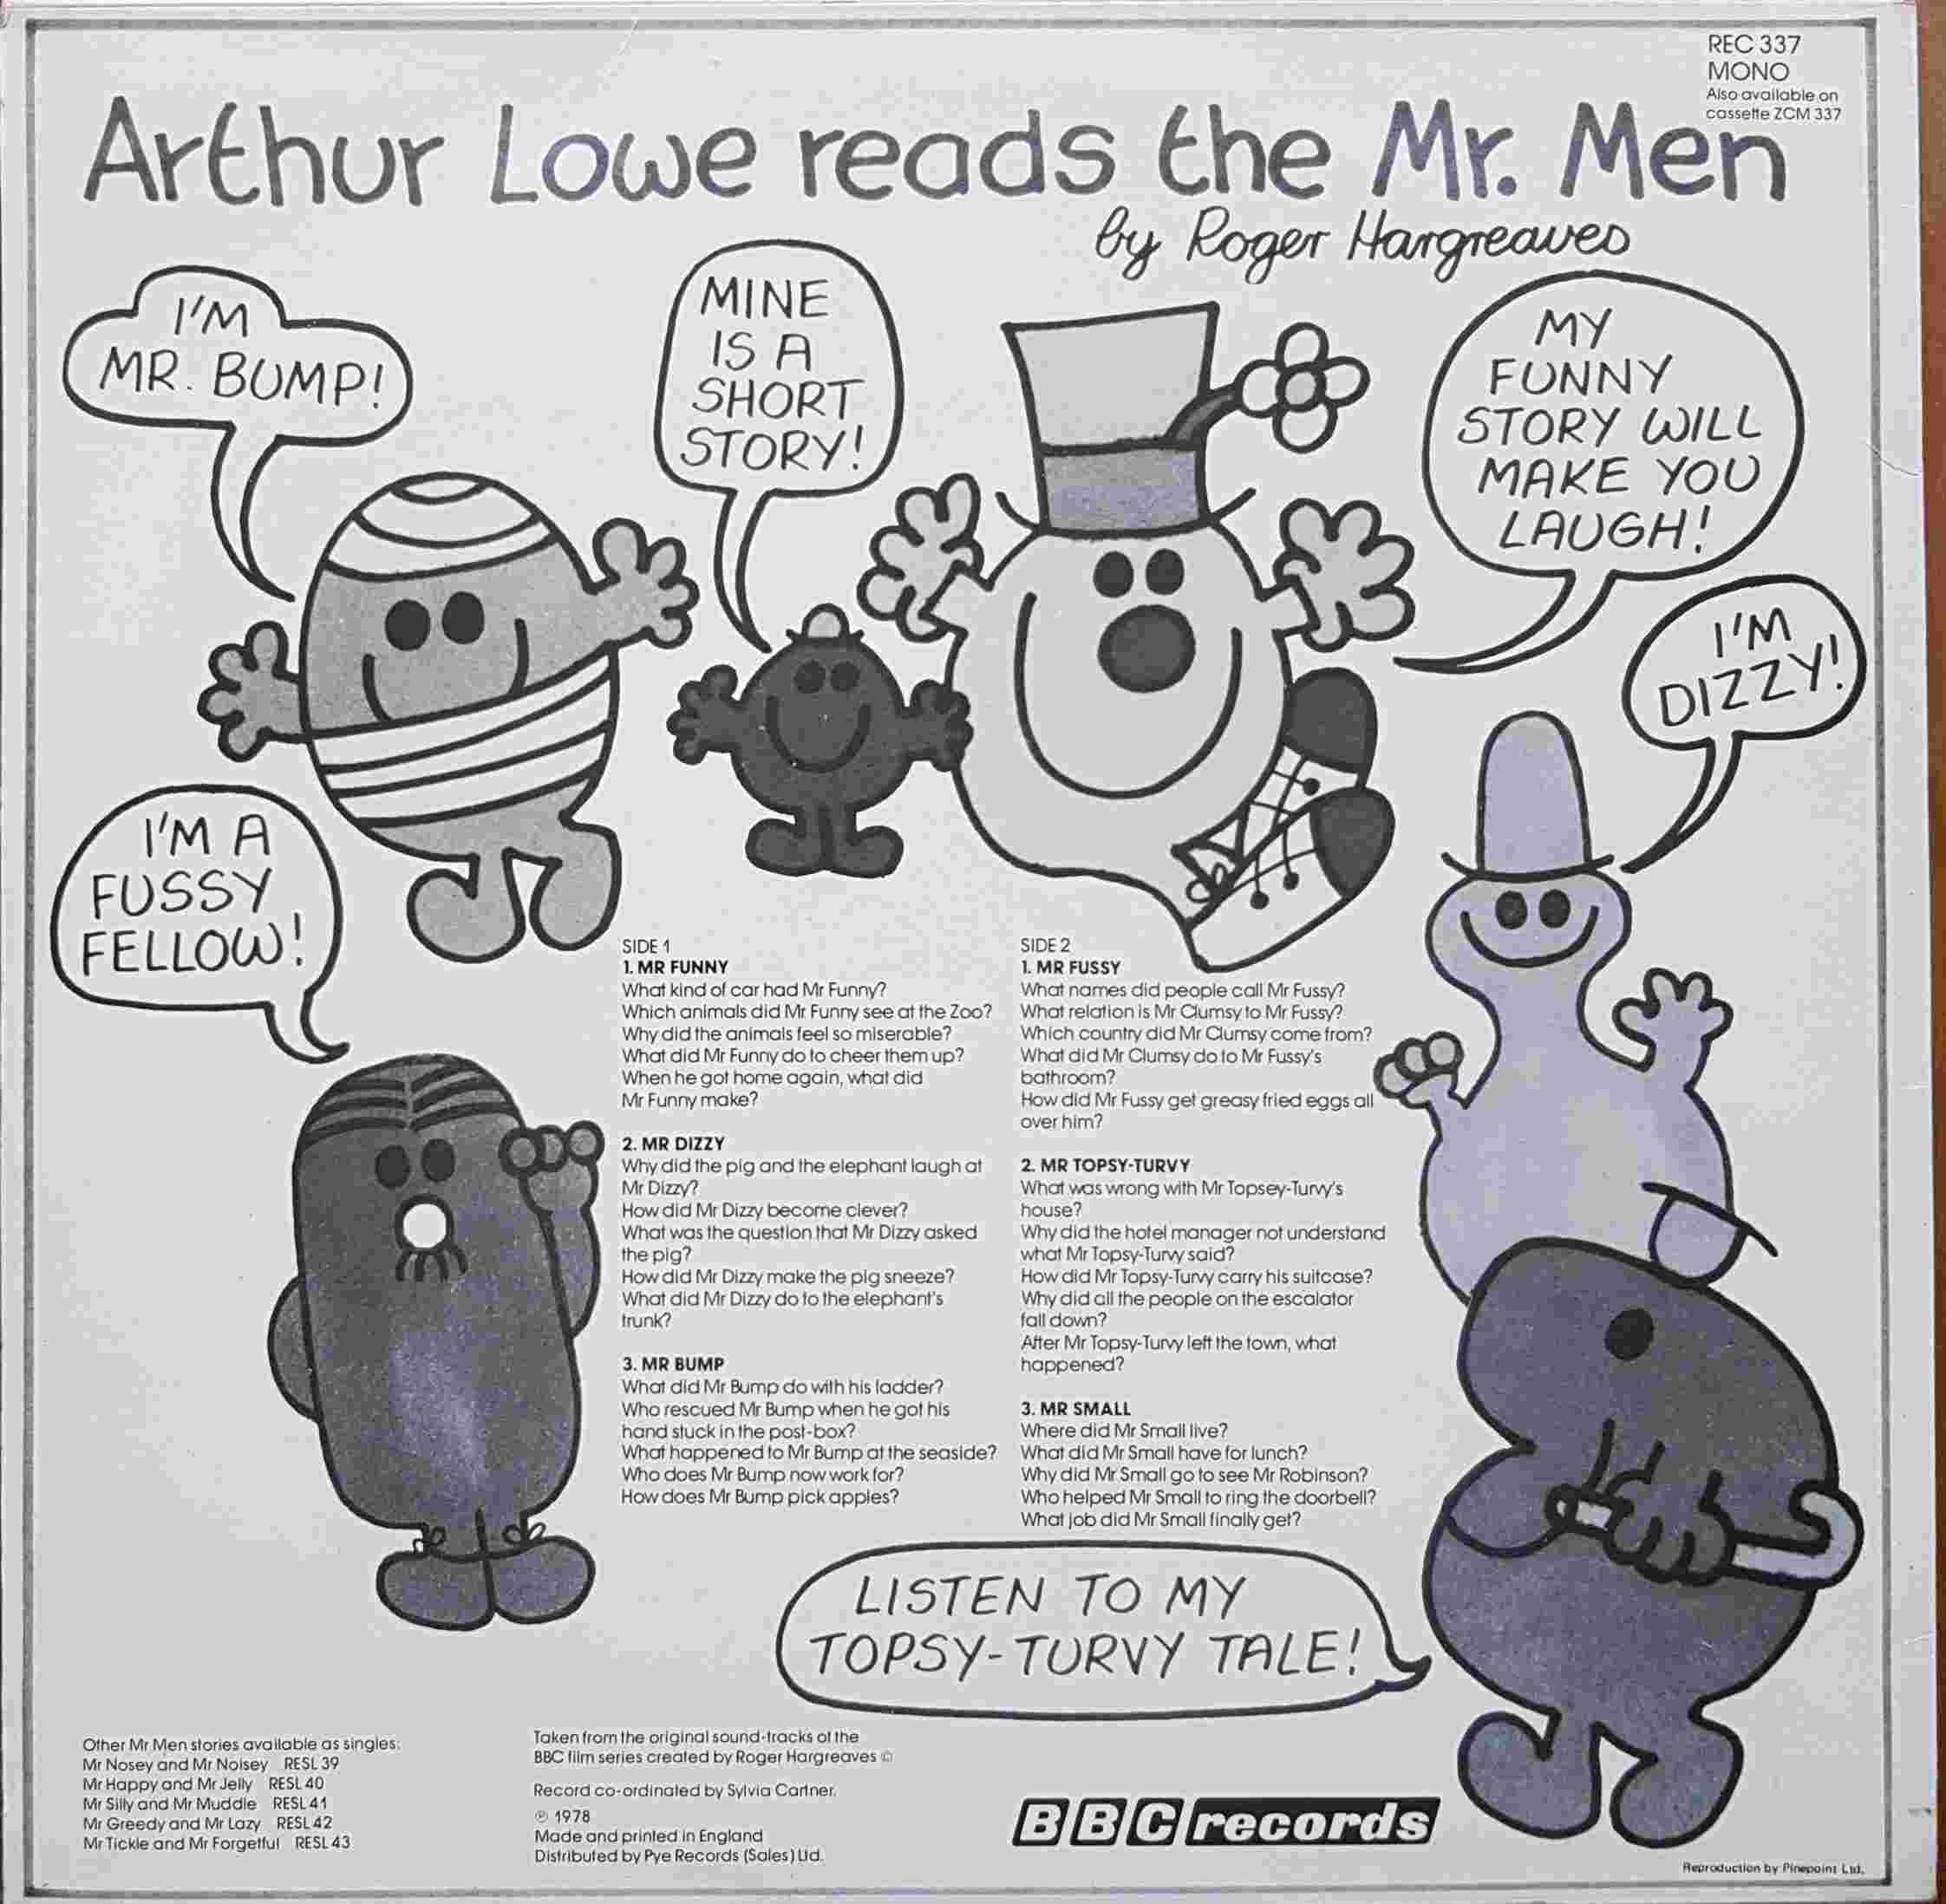 Picture of REC 337 Mr. Men stories by artist Roger Hargreaves from the BBC records and Tapes library